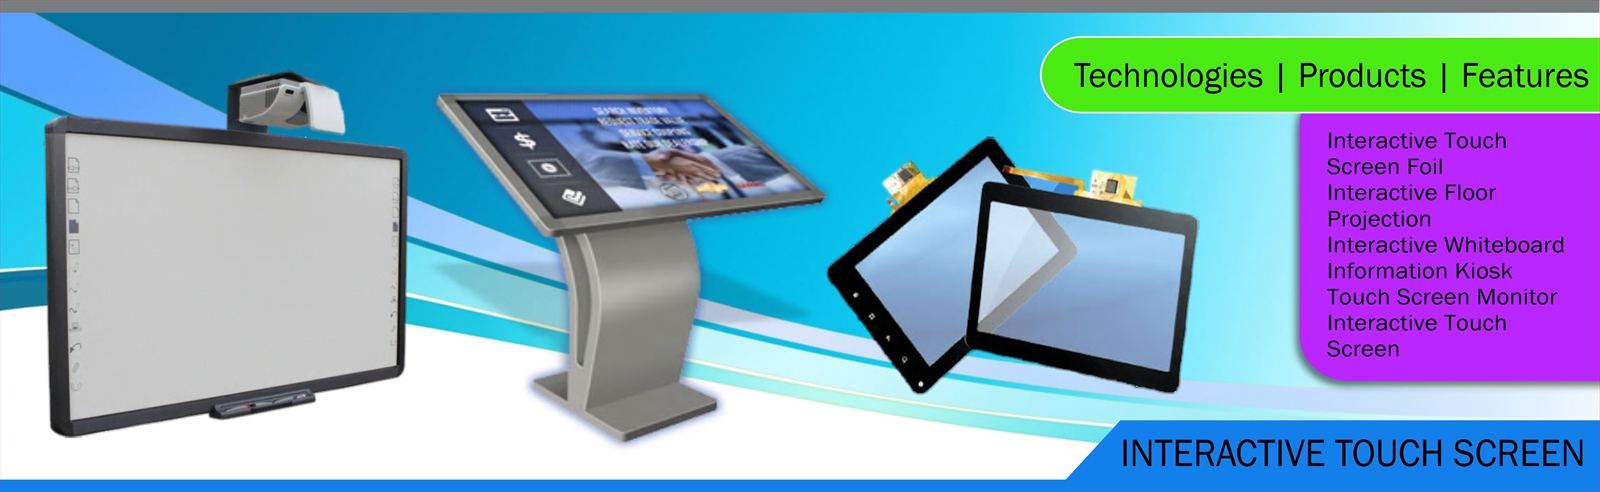 Elpro Technologies Interactive Touch Screen